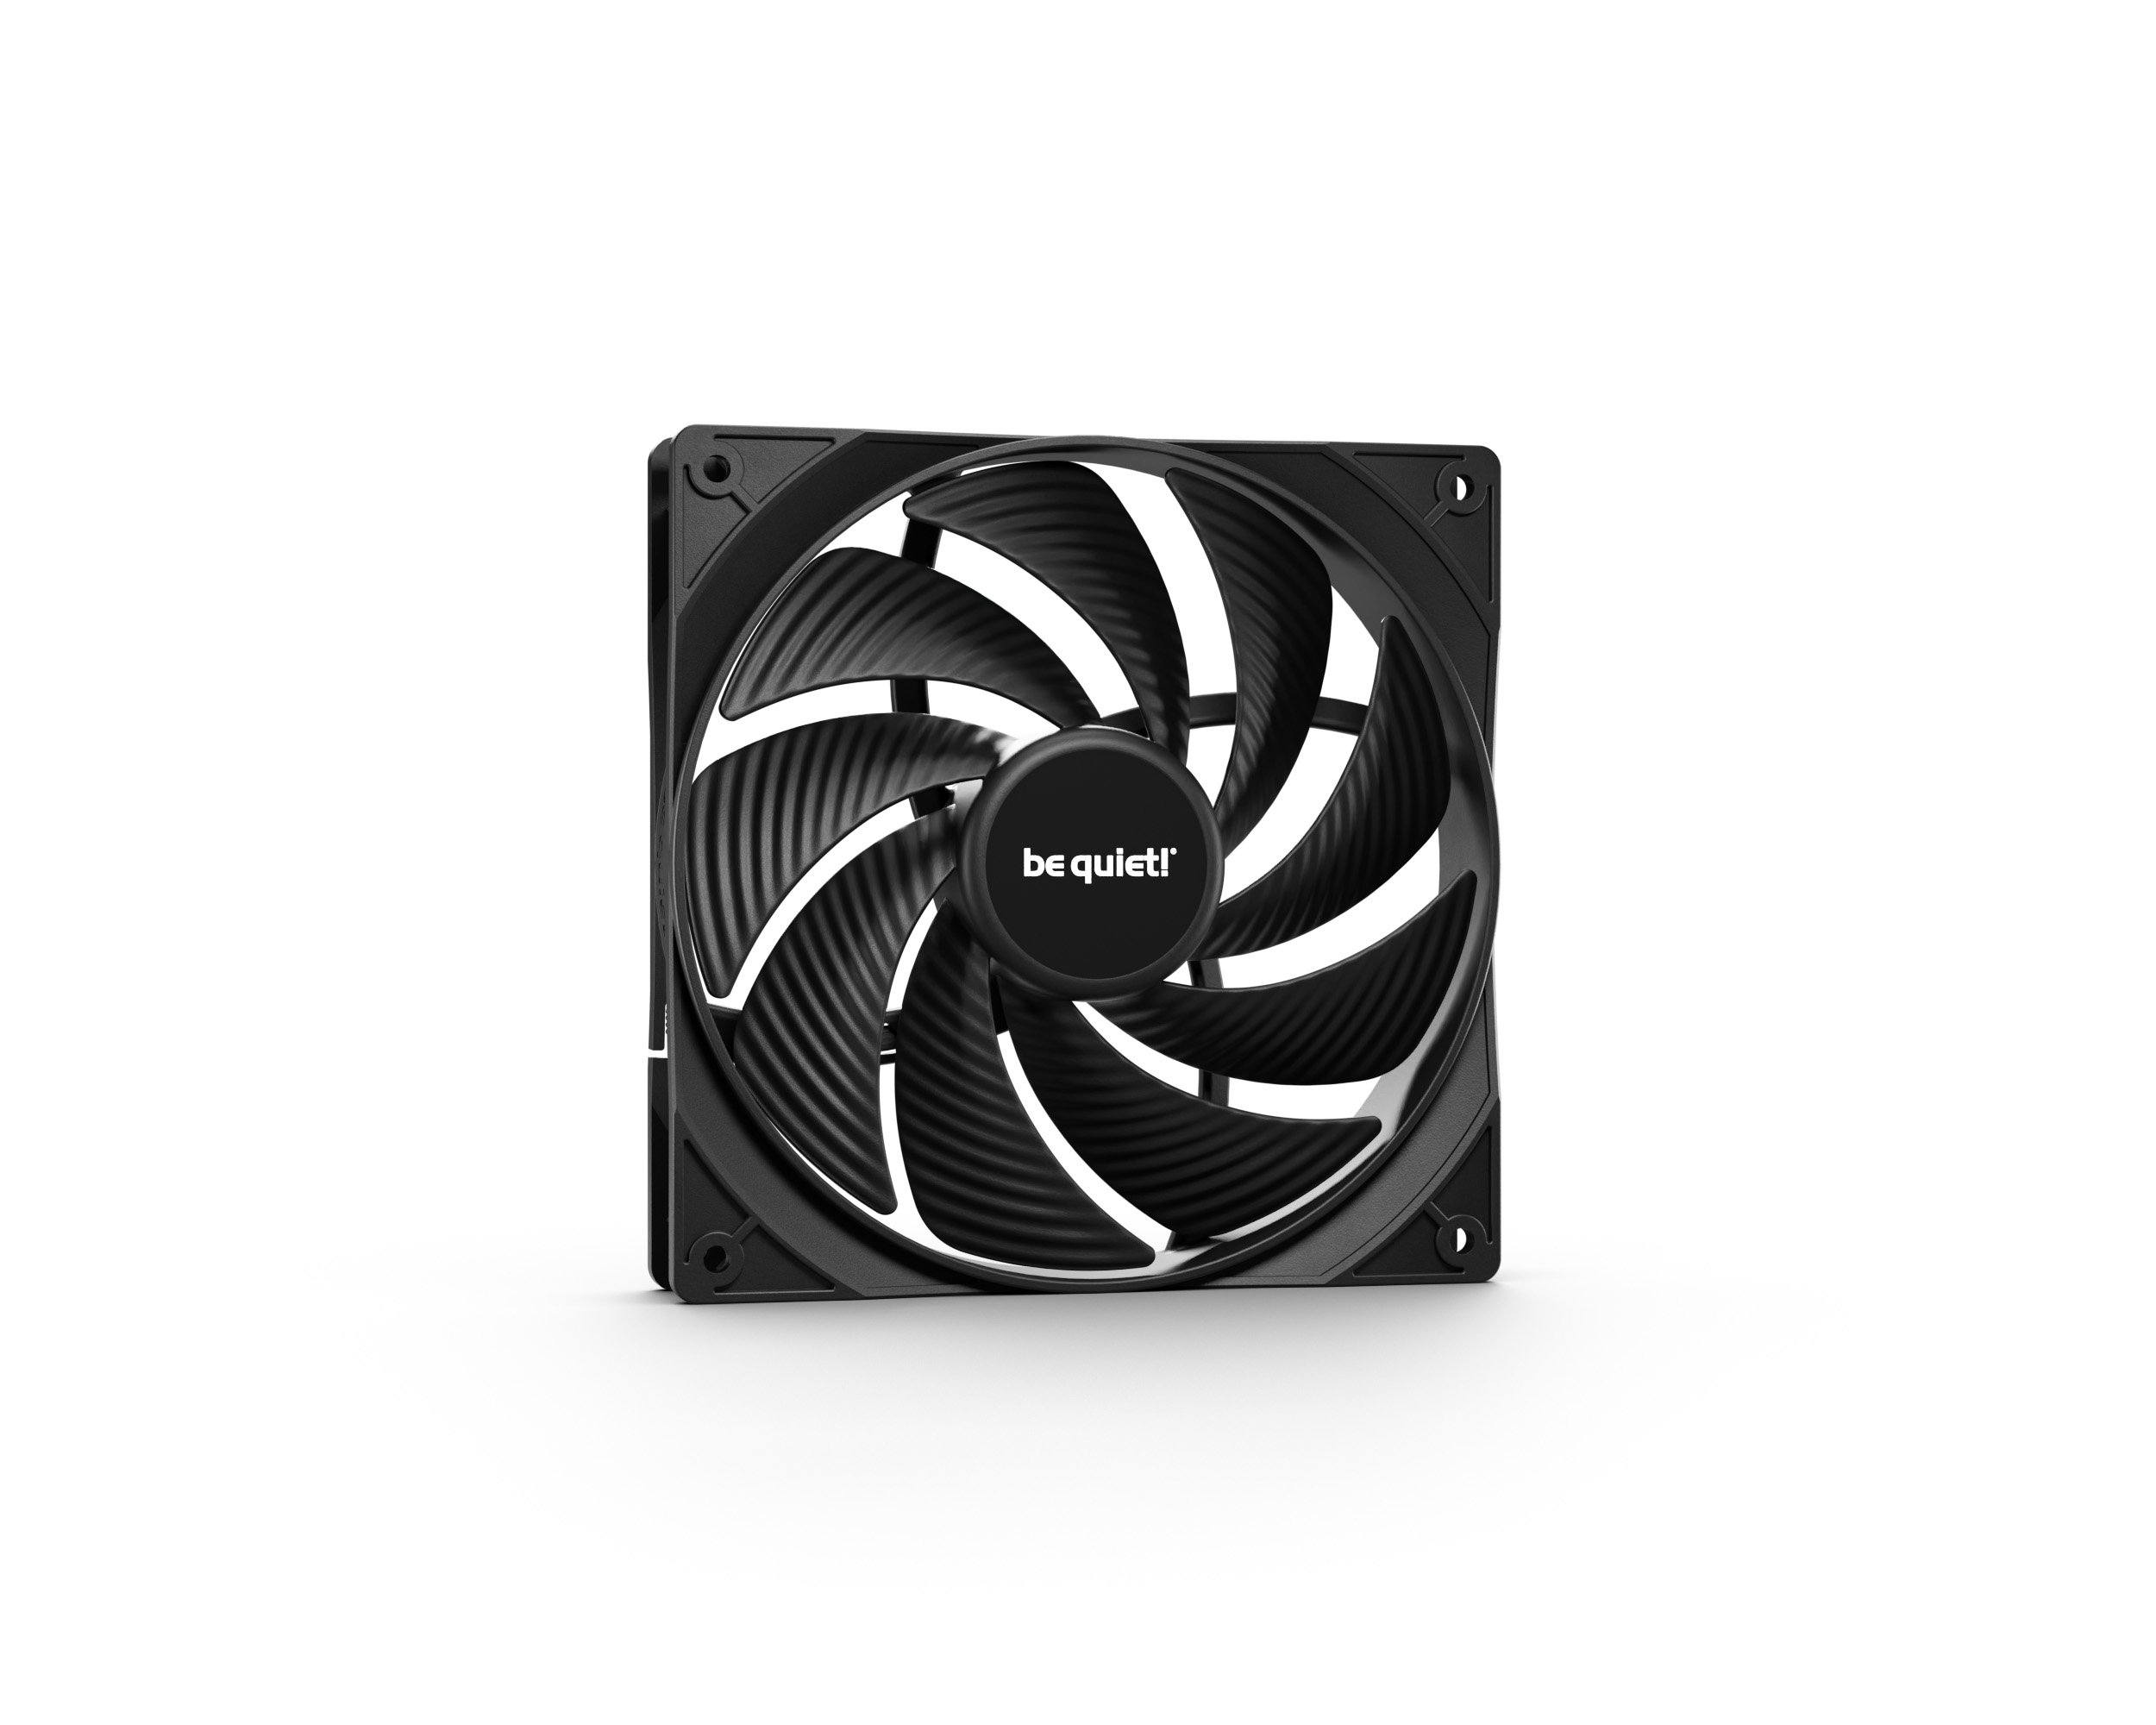 PURE WINGS 3  140mm PWM high-speed silent essential Fans from be quiet!